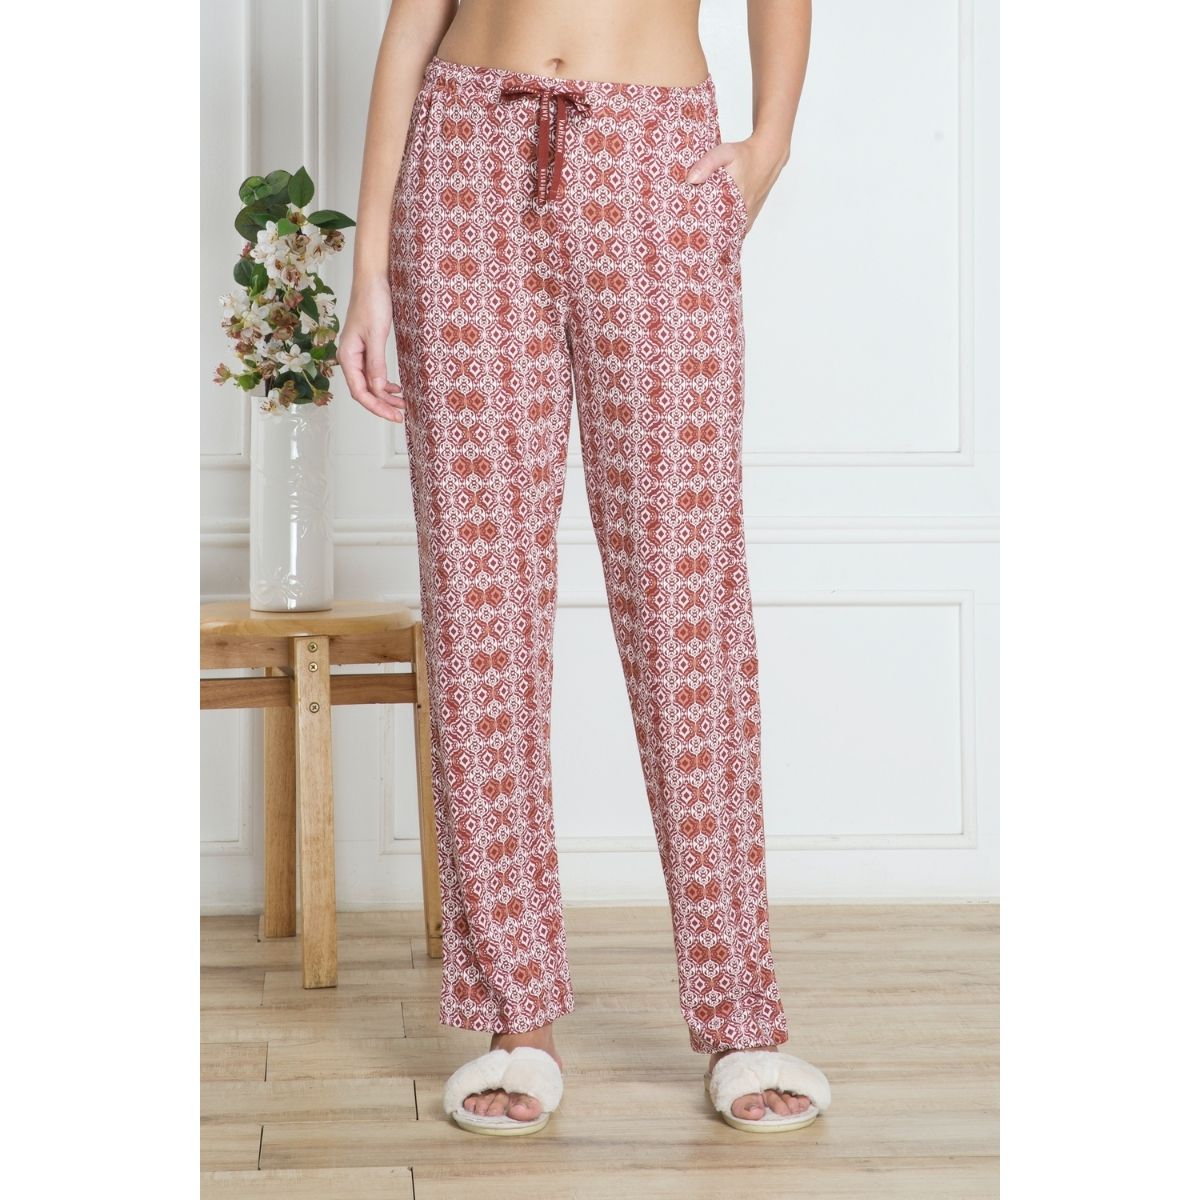 Van Heusen Intimates Pyjama, Live-In Lounge Pants with Pockets for Women at